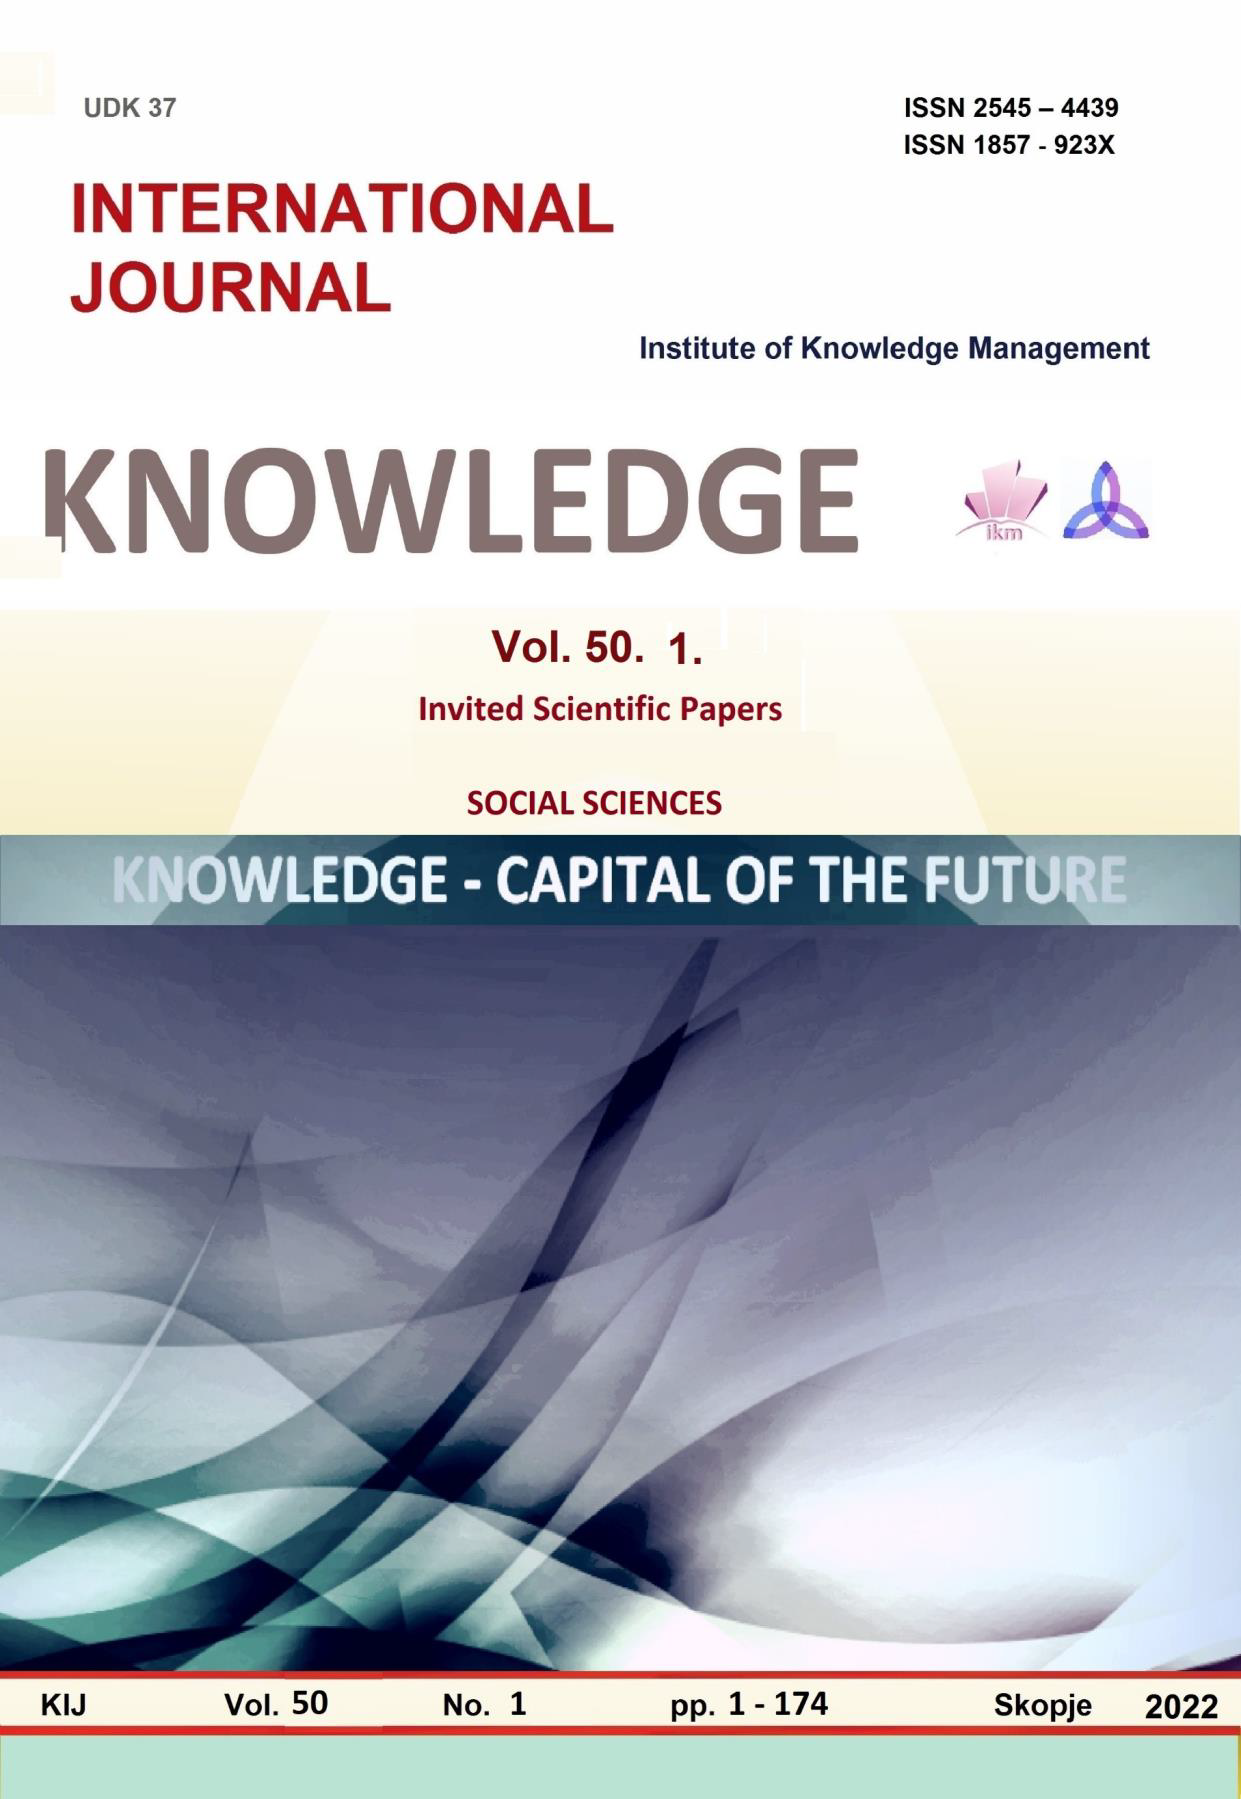 					View Vol. 50 No. 1 (2022): Knowledge - Capital Of The Future
				